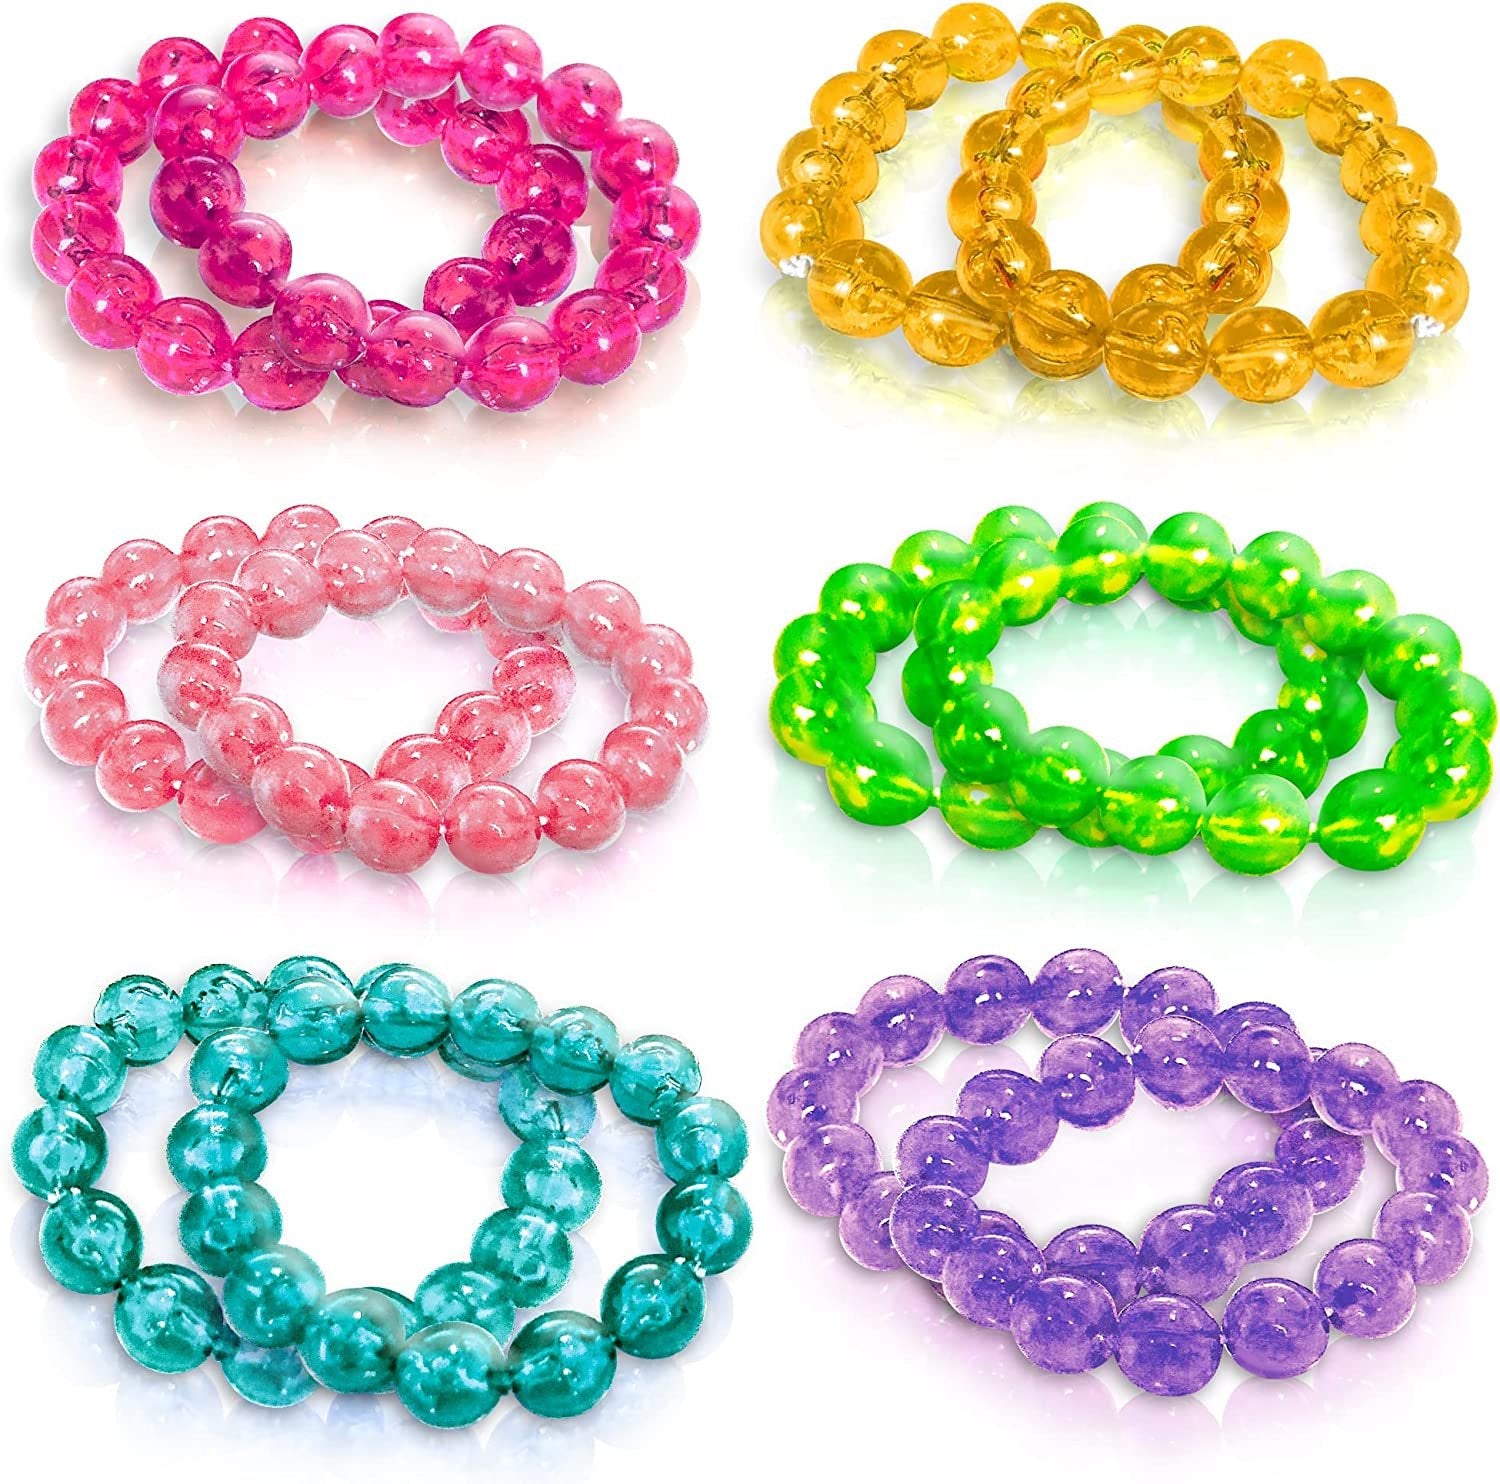 Bead Bracelets for Kids - 12 Pack - Toy Jewelry Wristbands for Girls - Assorted Colors - Cute Birthday Favors, Party Decorations and Giveaways, Goody Bag Fillers, Dress Up Accessories